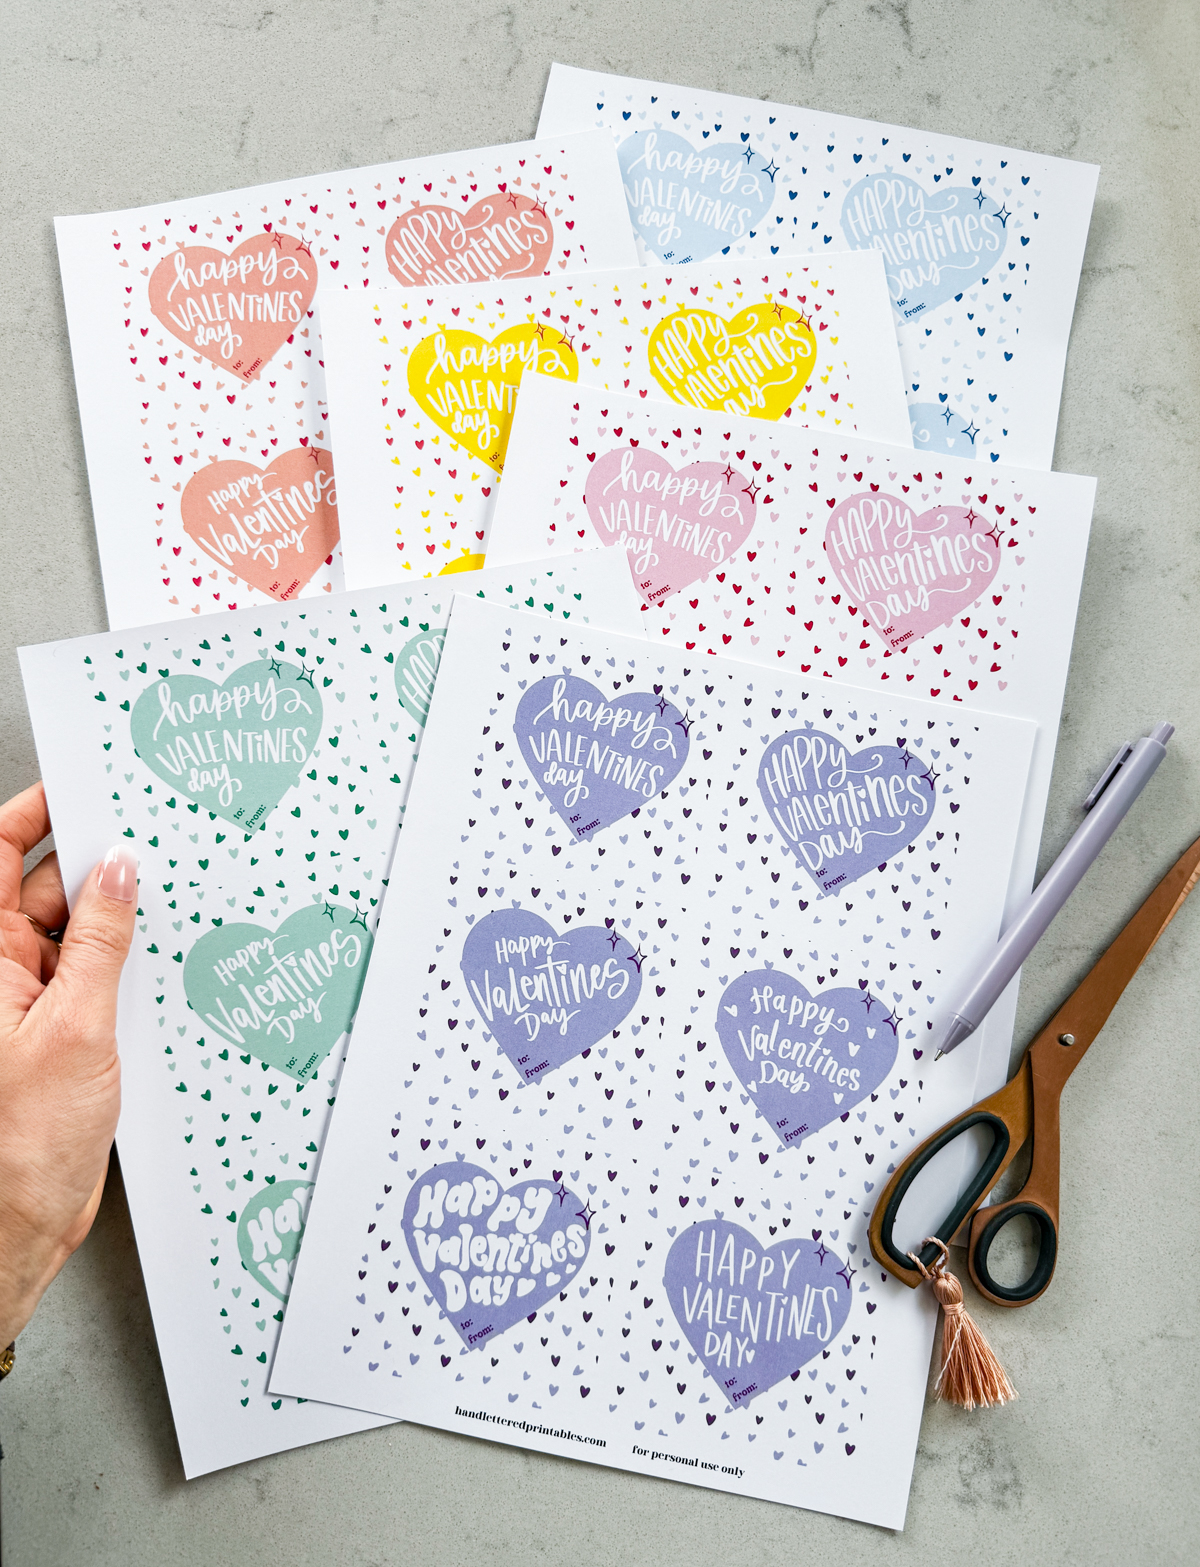 happy valentines day hand lettered valentines cards free printable shown printed off but not yet cut to size. 6 color schemes available, shown on marble countertop with scissors and pen